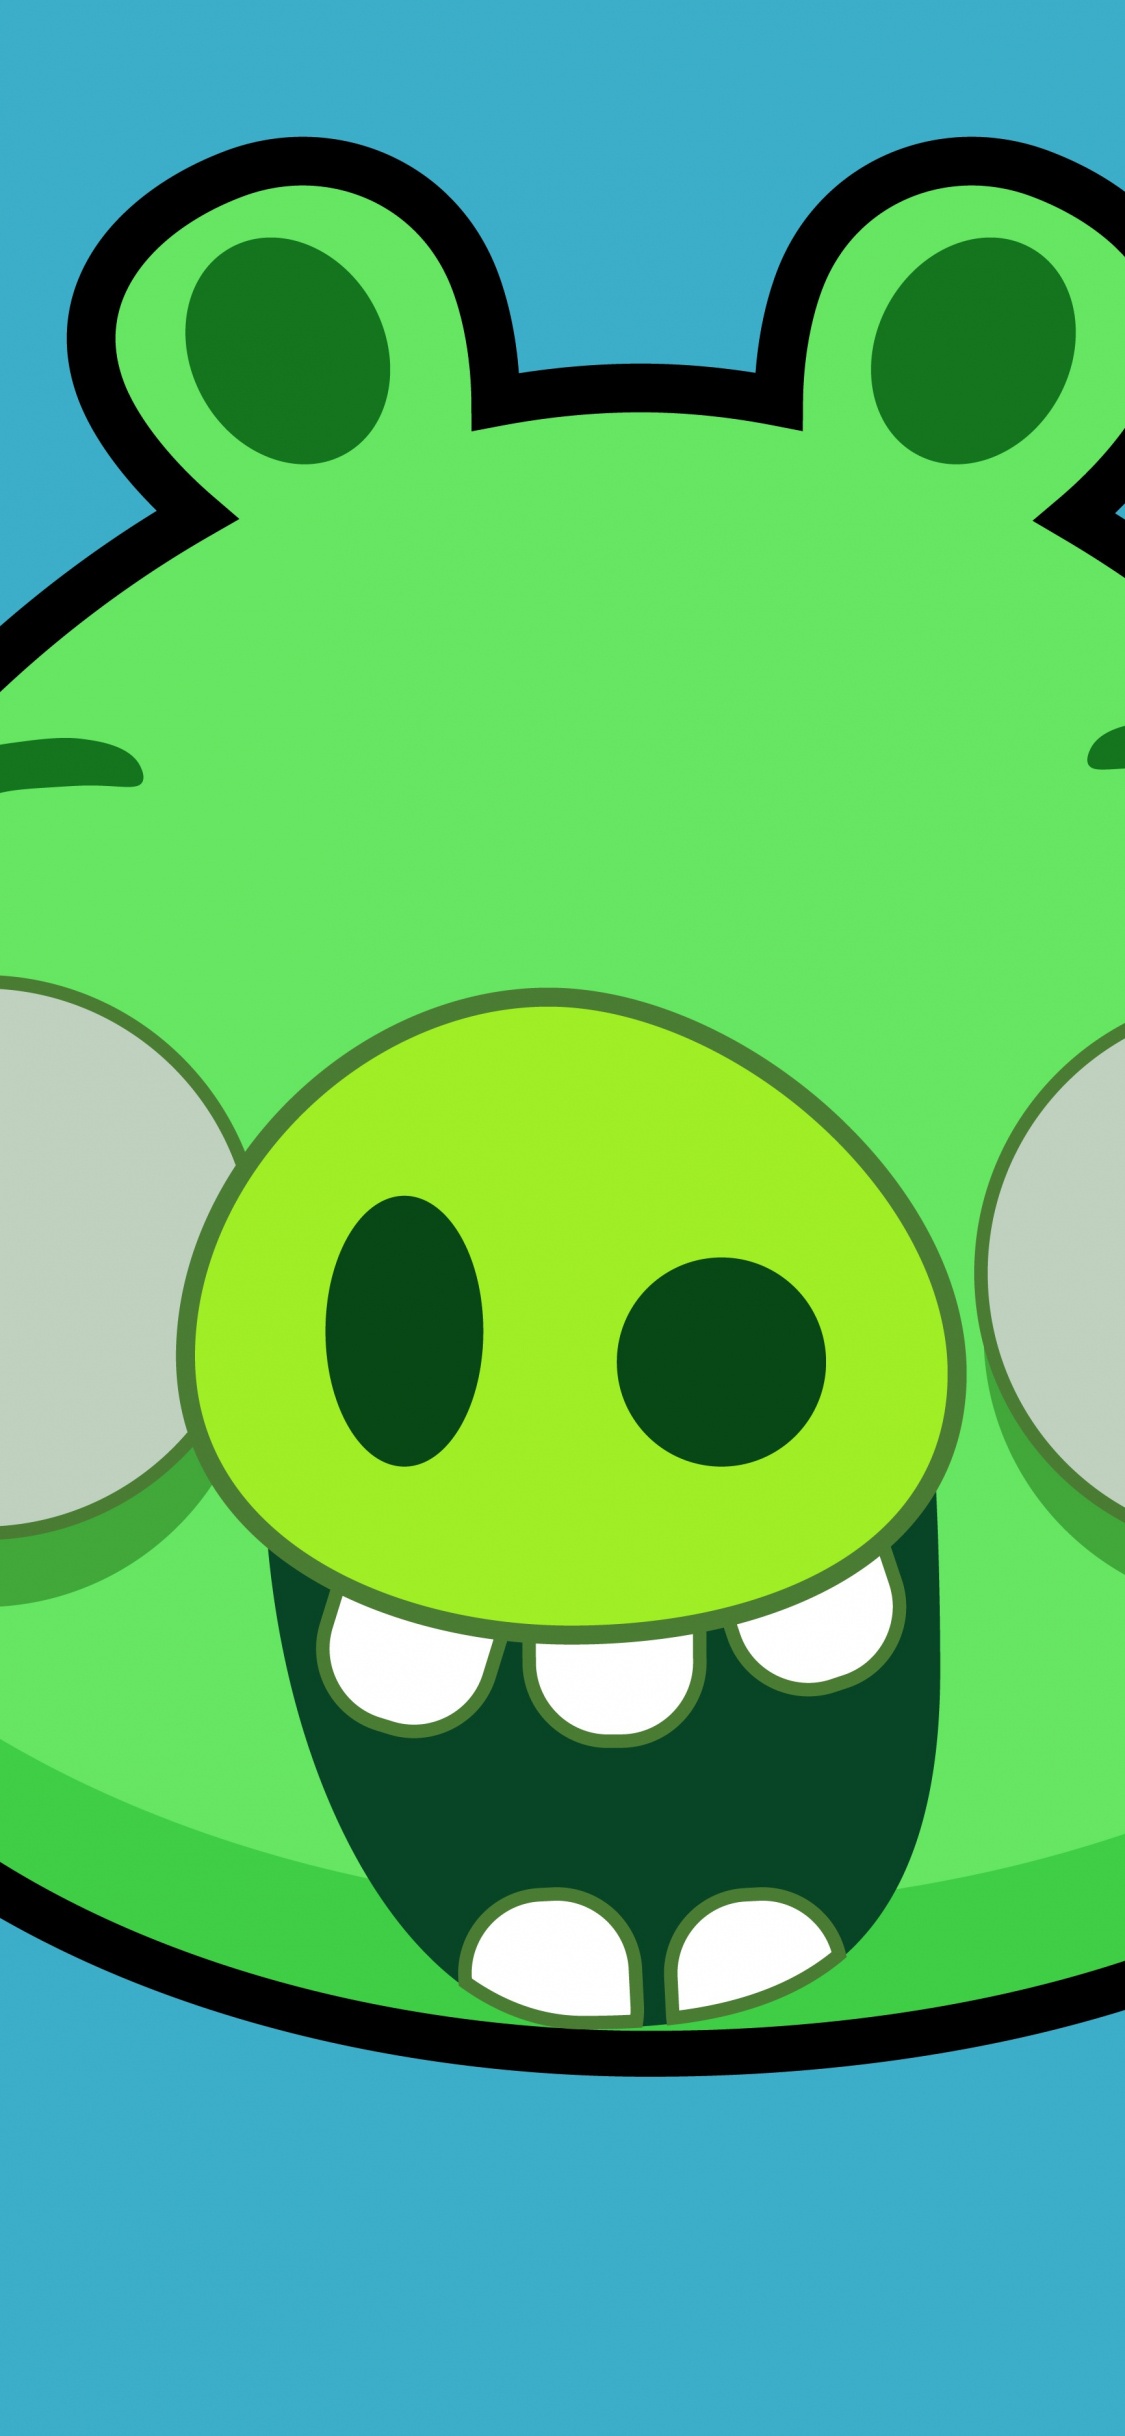 Angry Birds, Green, Cartoon, Smile, Illustration. Wallpaper in 1125x2436 Resolution